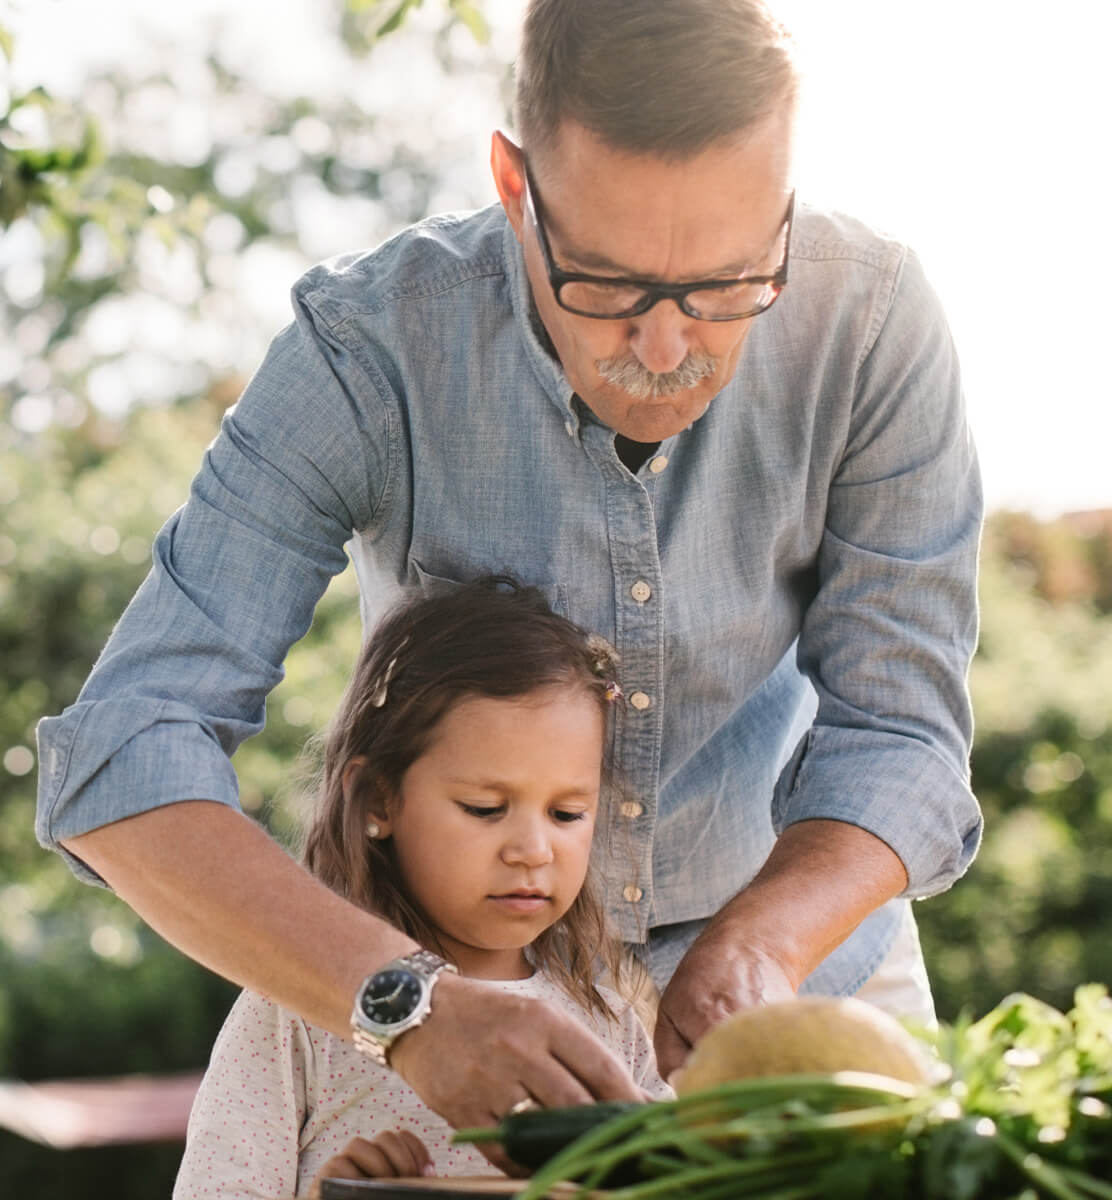 A grandfather gardening with his granddaughter